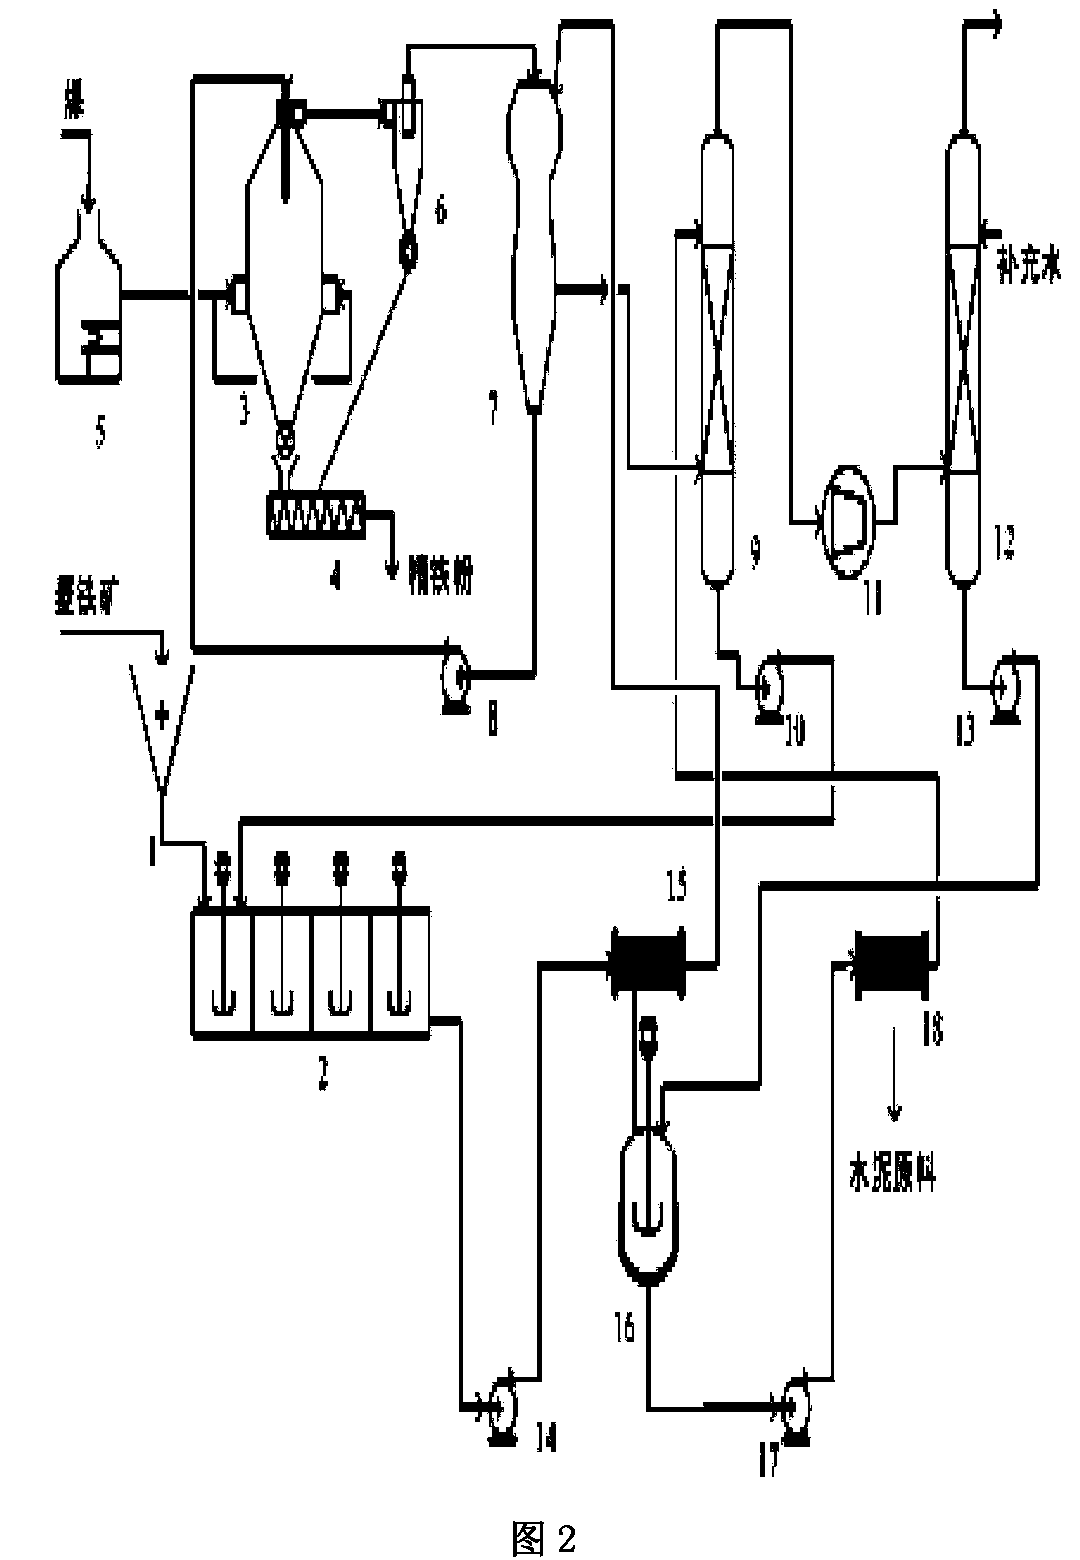 Technique and system for preparing fine iron powder from siderite